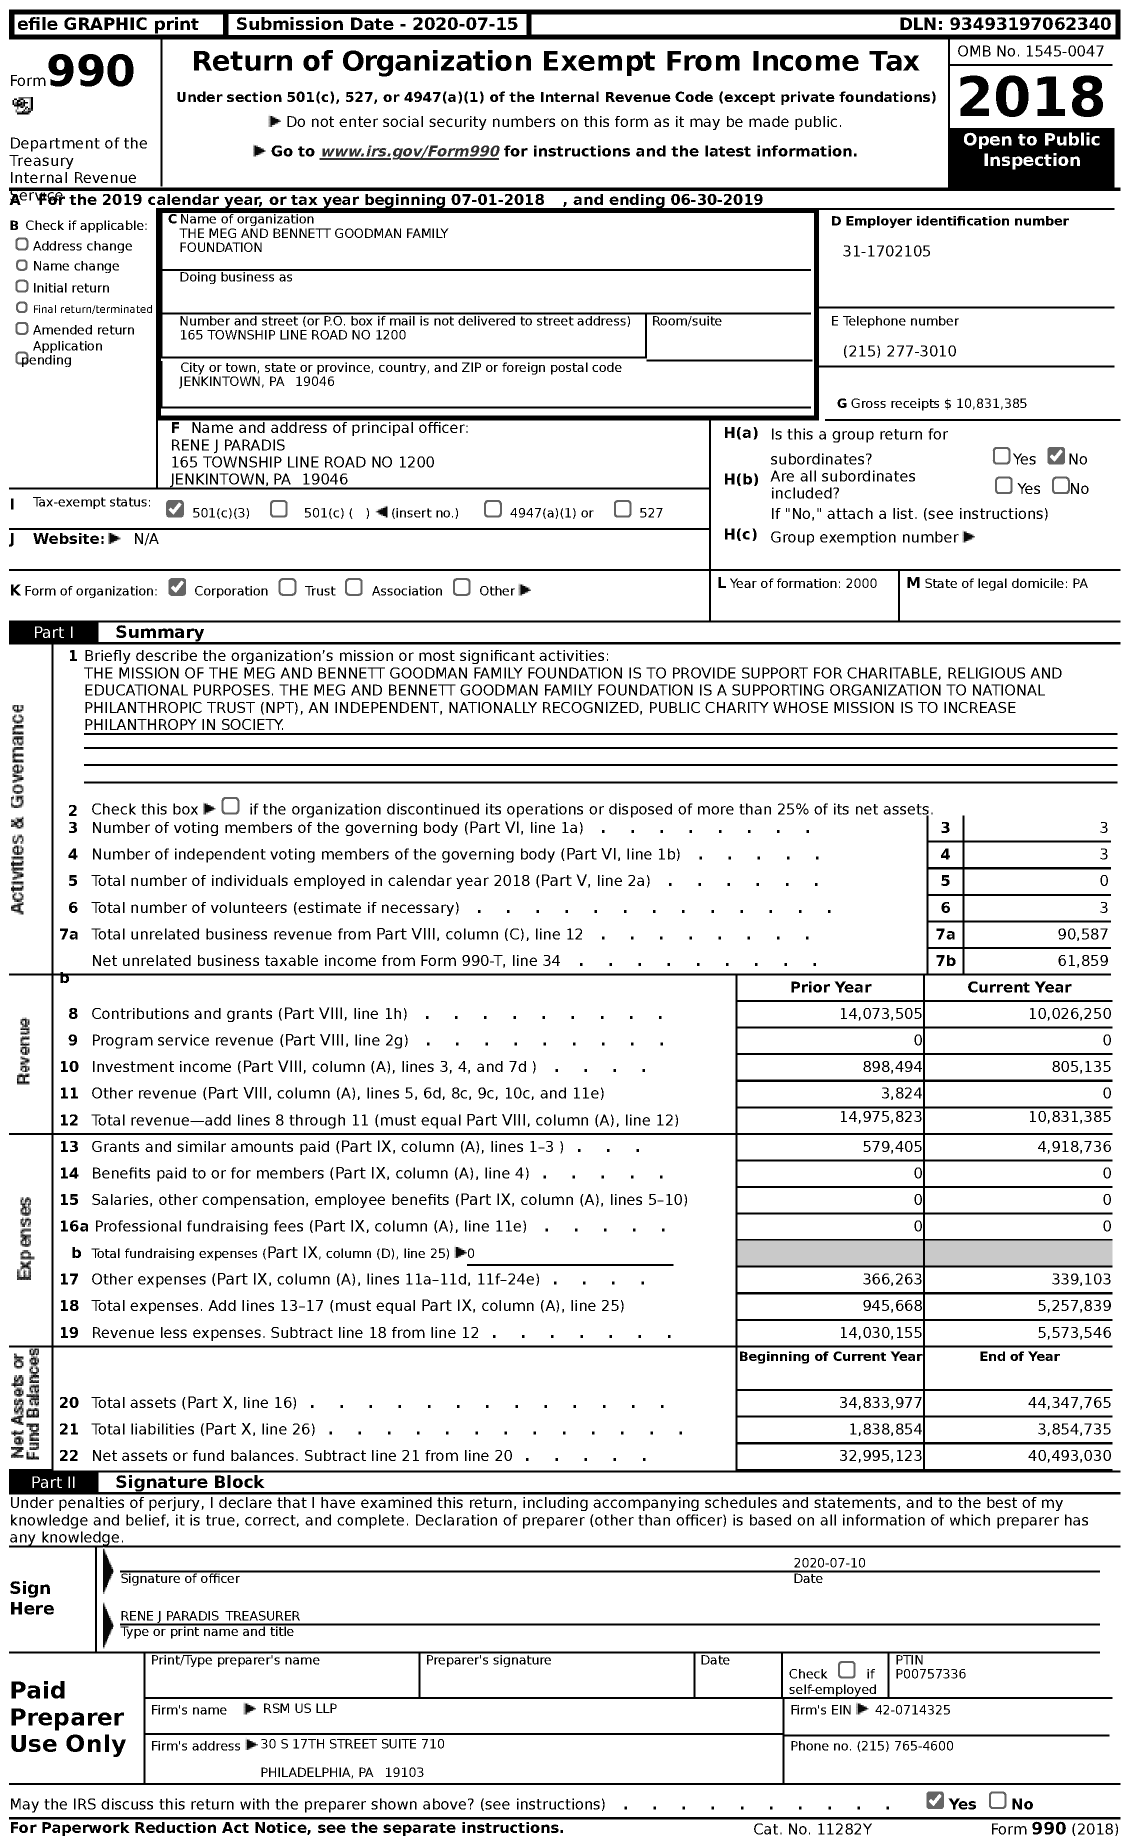 Image of first page of 2018 Form 990 for Meg and Bennett Goodman Family Foundation